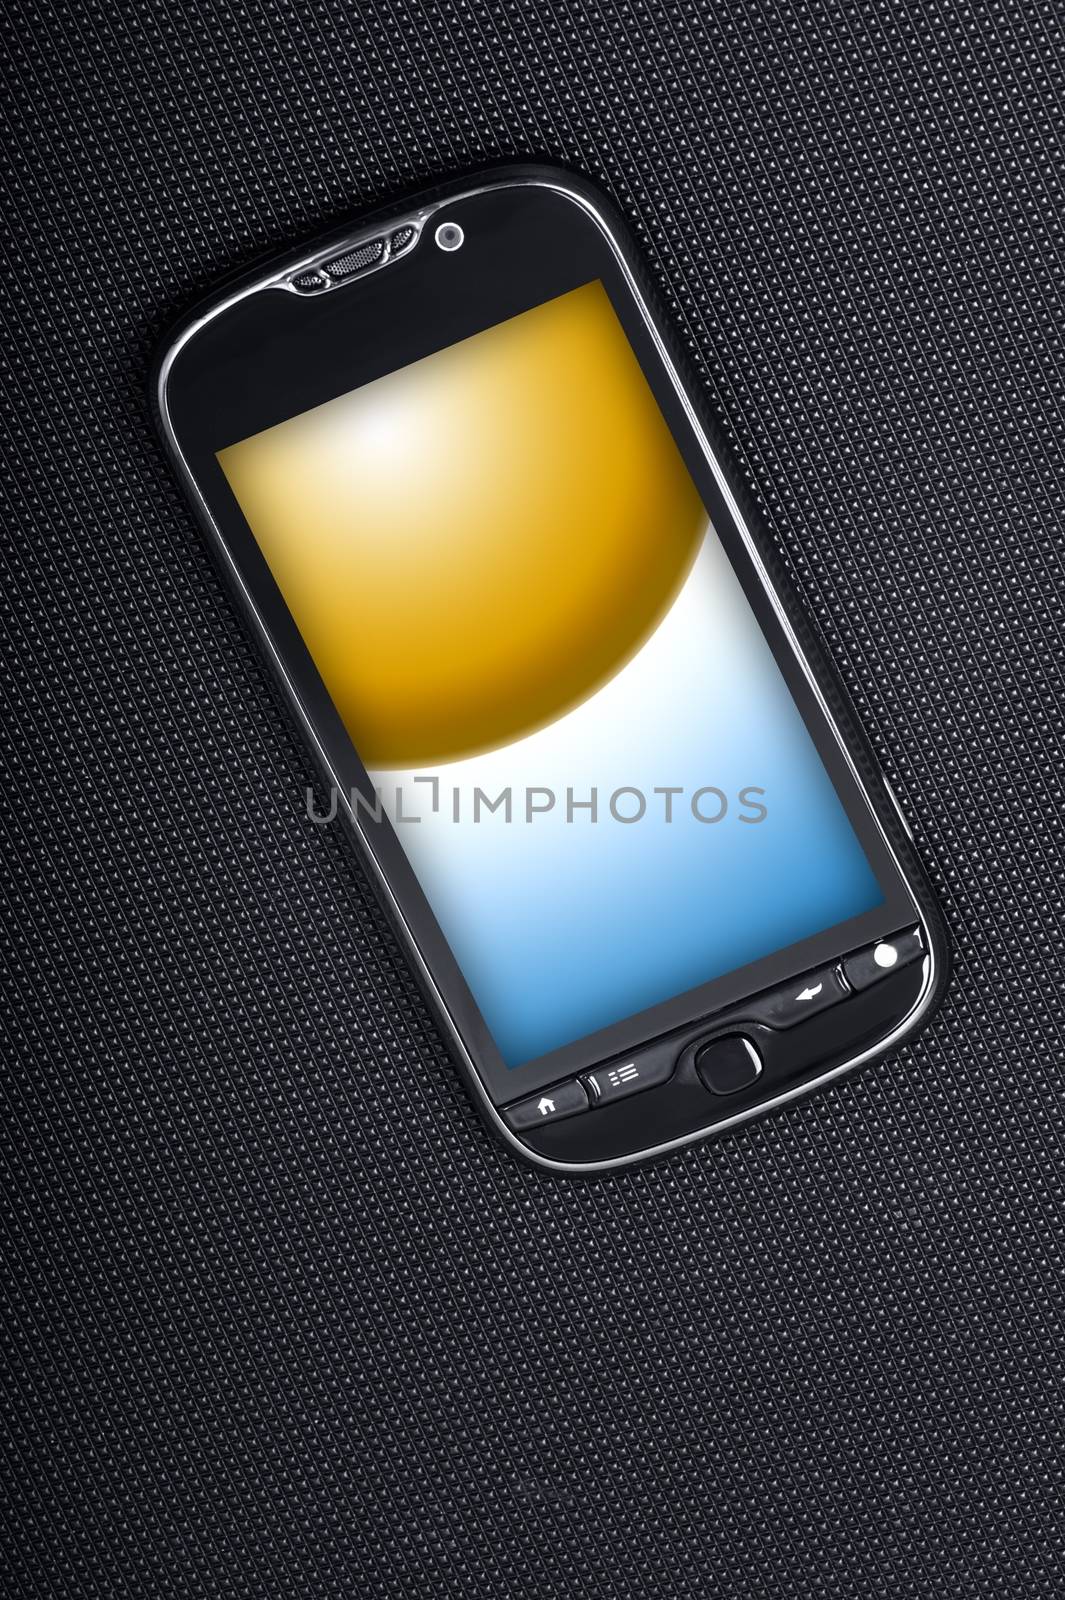 Smart Phone on Dark Carbon Background. Yellow-Blue Display Image. Modern Cellphone. Vertical Photo.